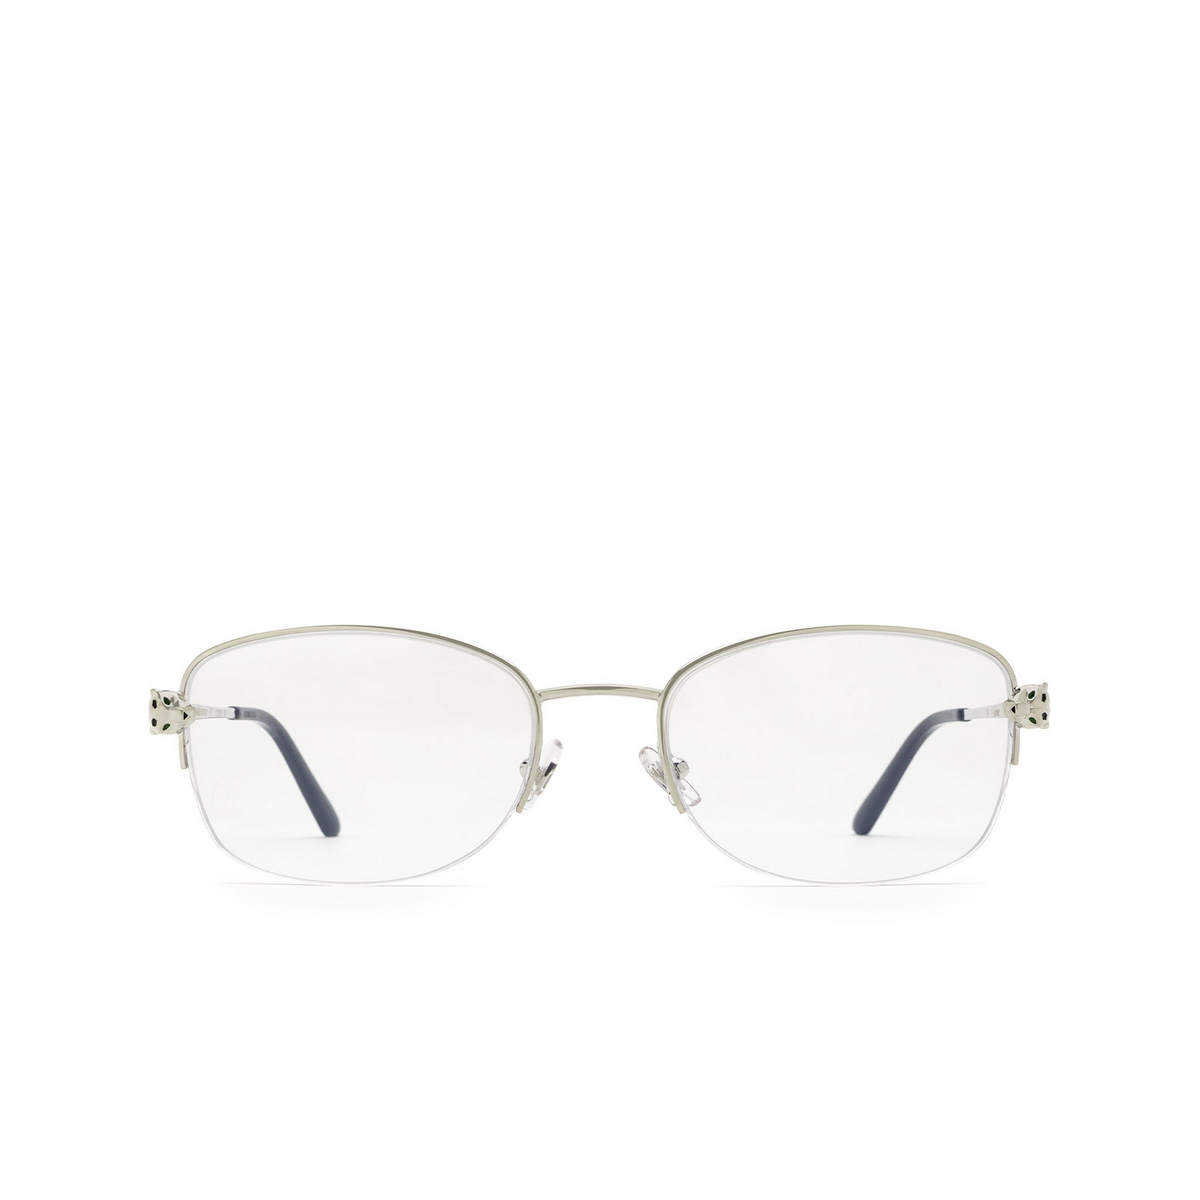 Cartier CT0235O Eyeglasses 002 Silver - front view